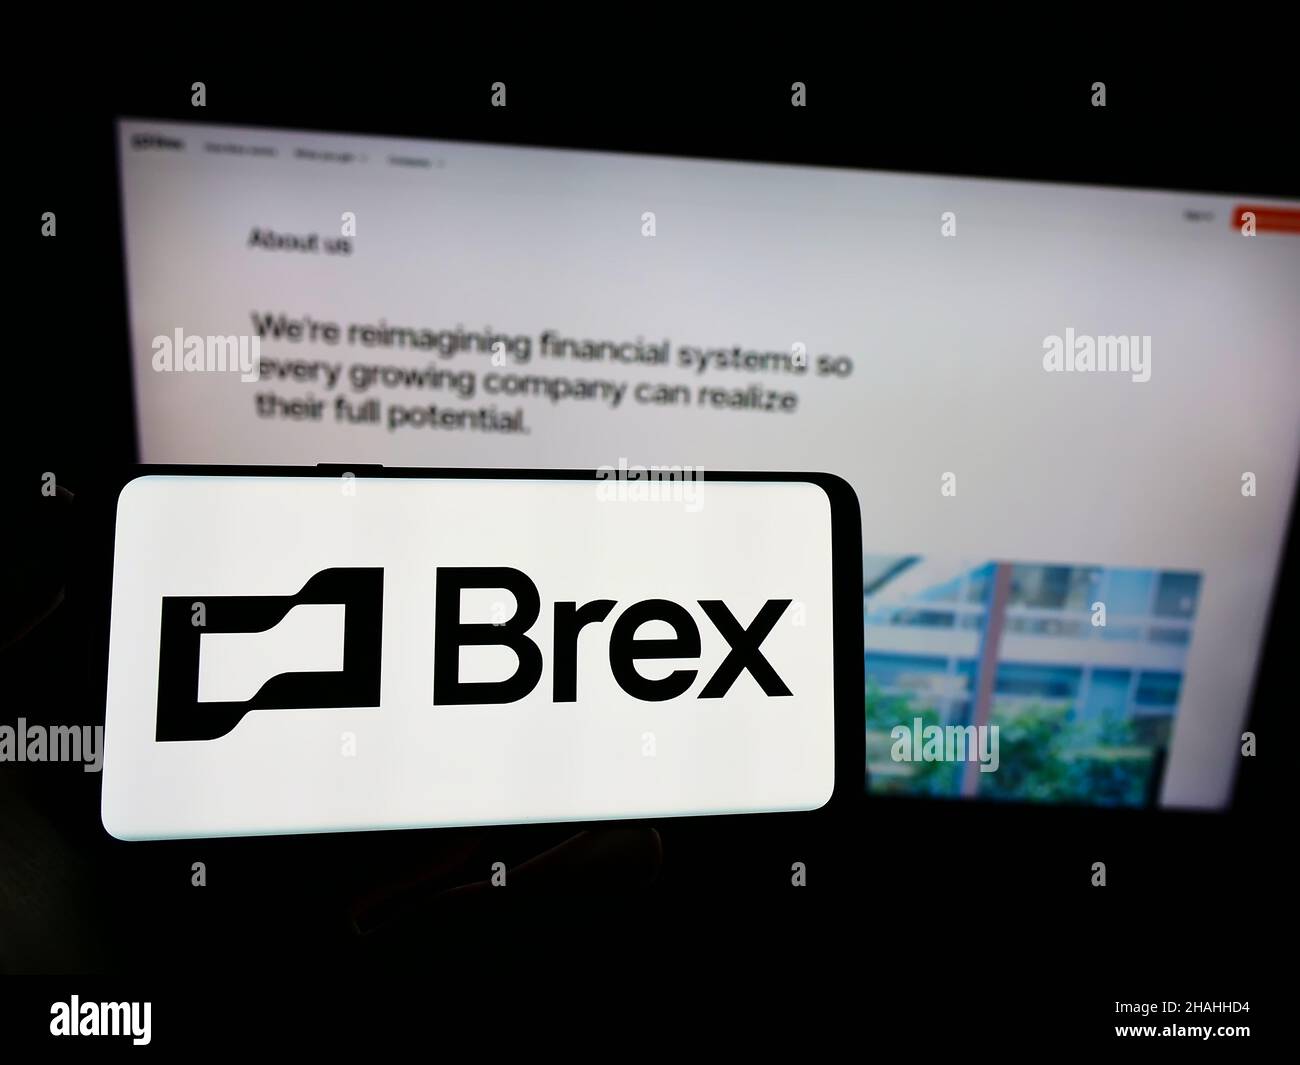 Person holding cellphone with logo of American financial technology company Brex Inc. on screen in front of webpage. Focus on phone display. Stock Photo